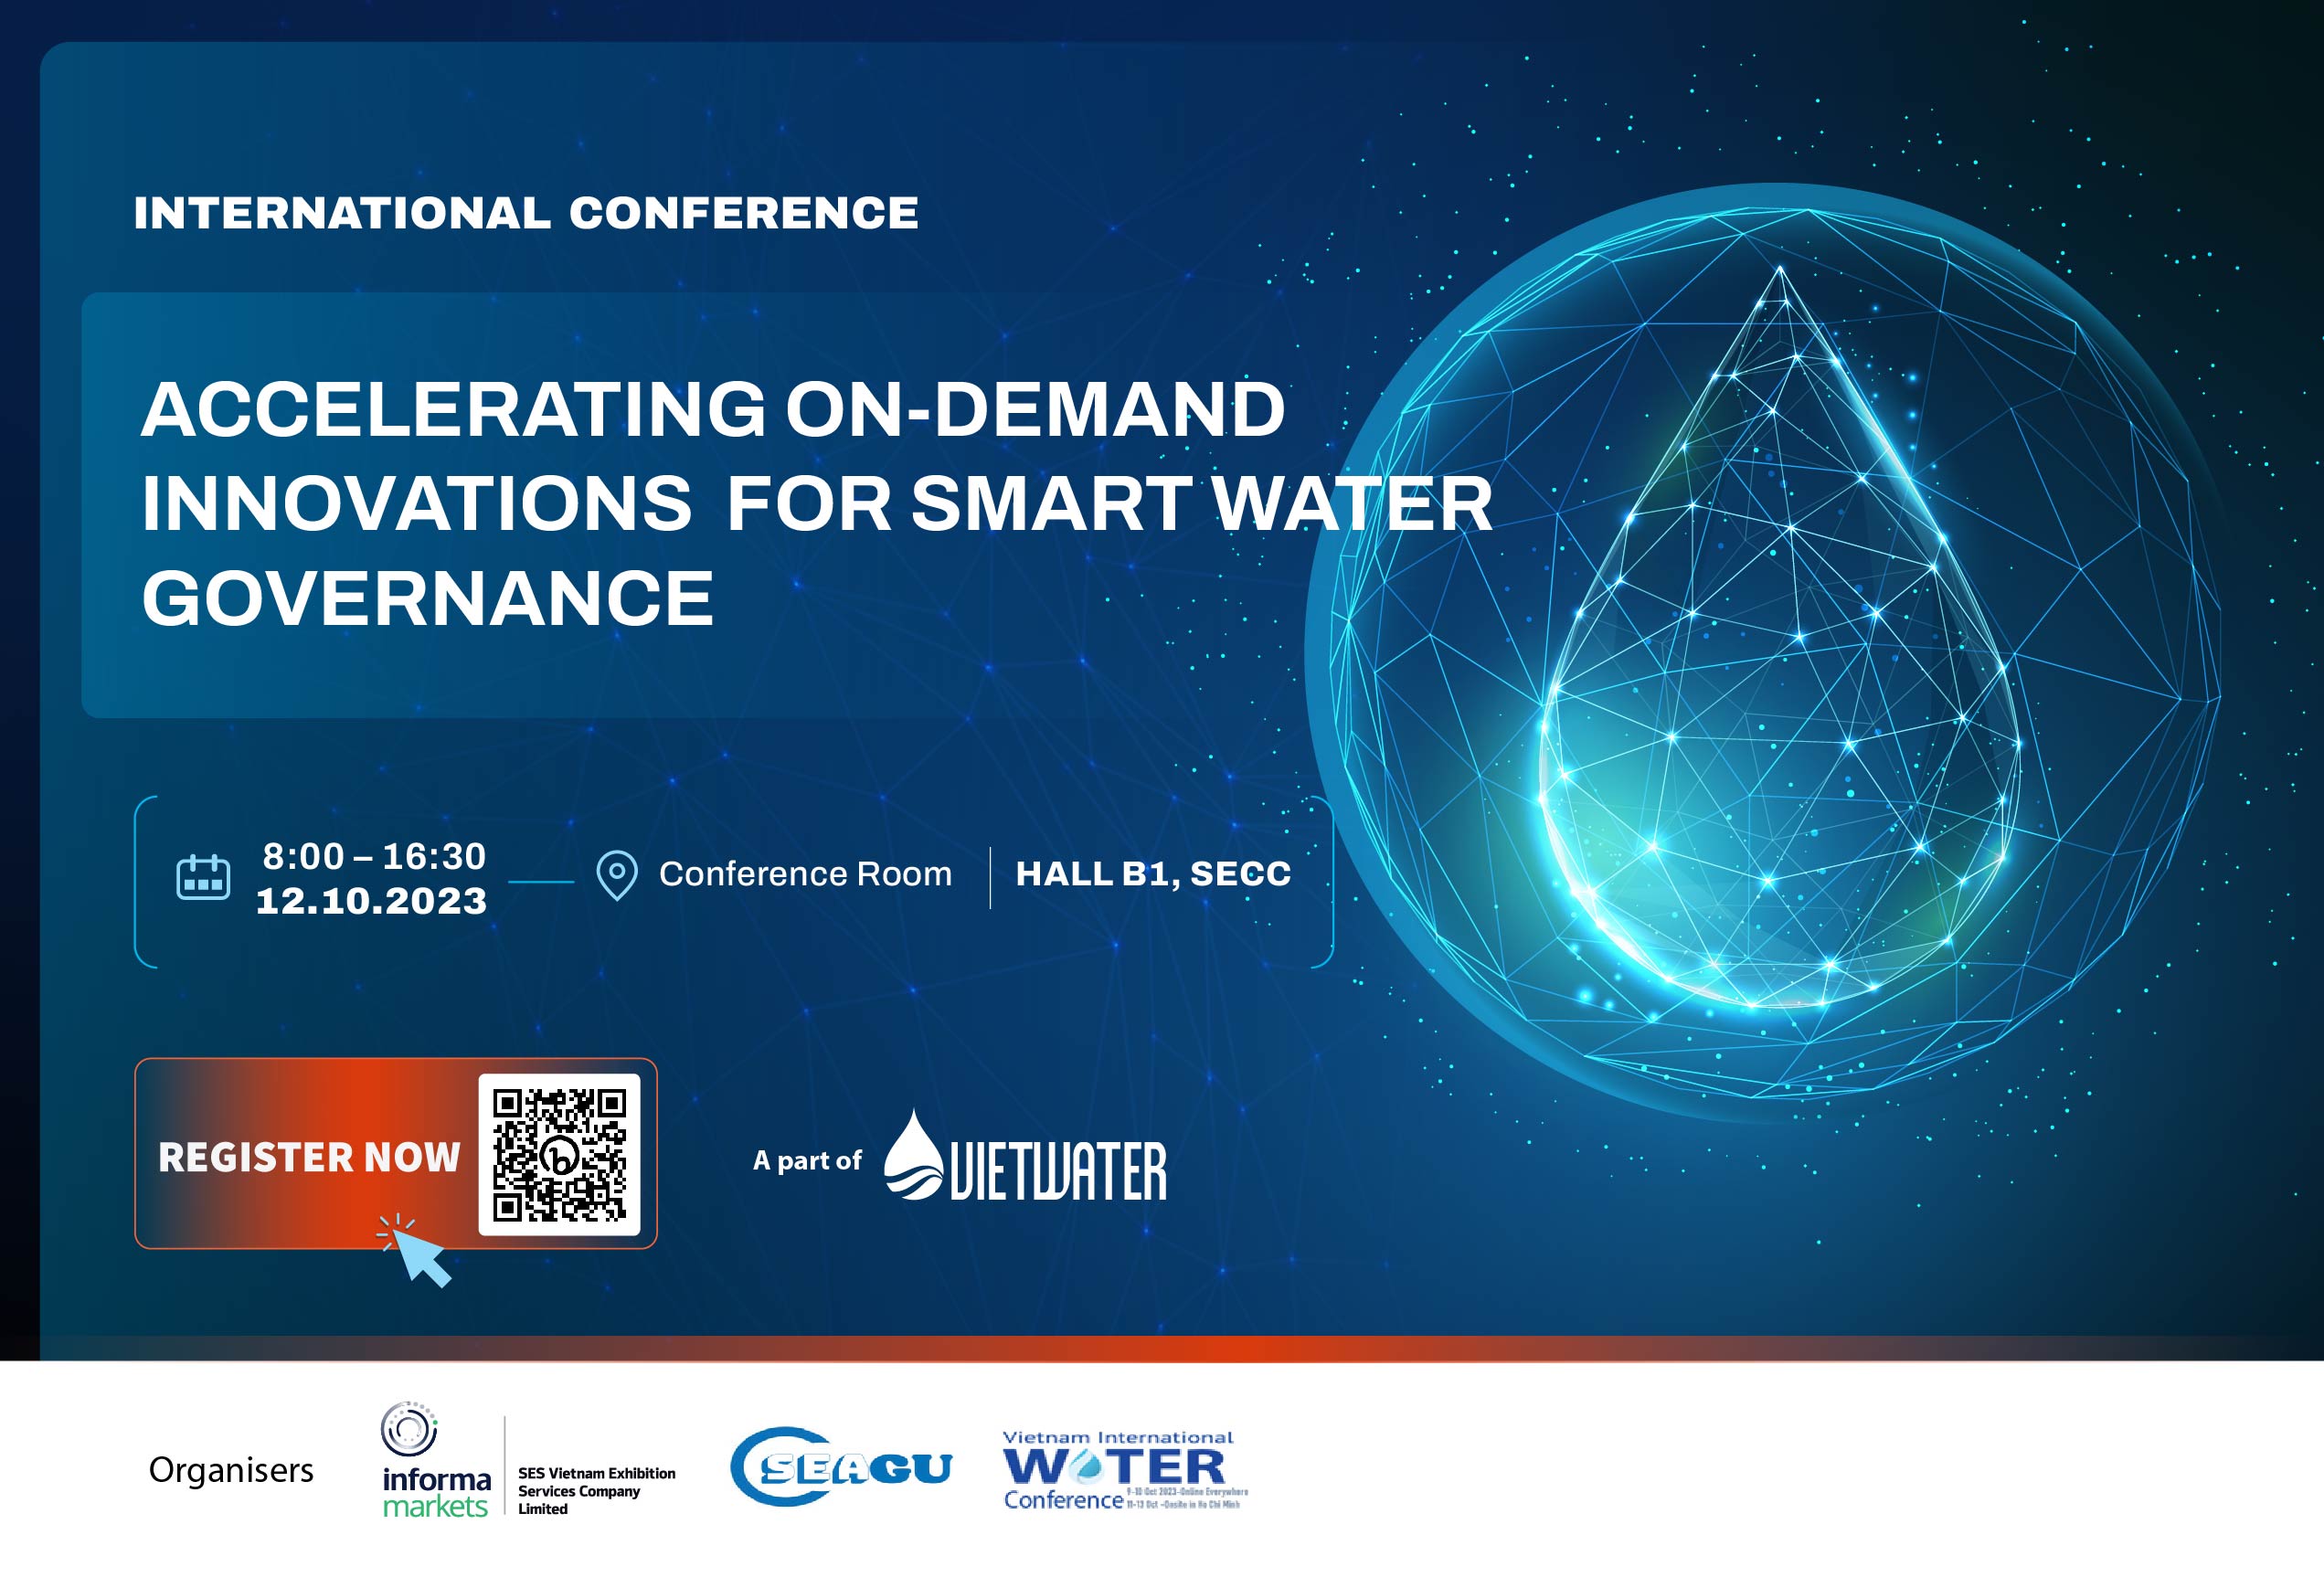 ACCELERATING ON-DEMAND INNOVATIONS FOR SMART WATER GOVERNANCE